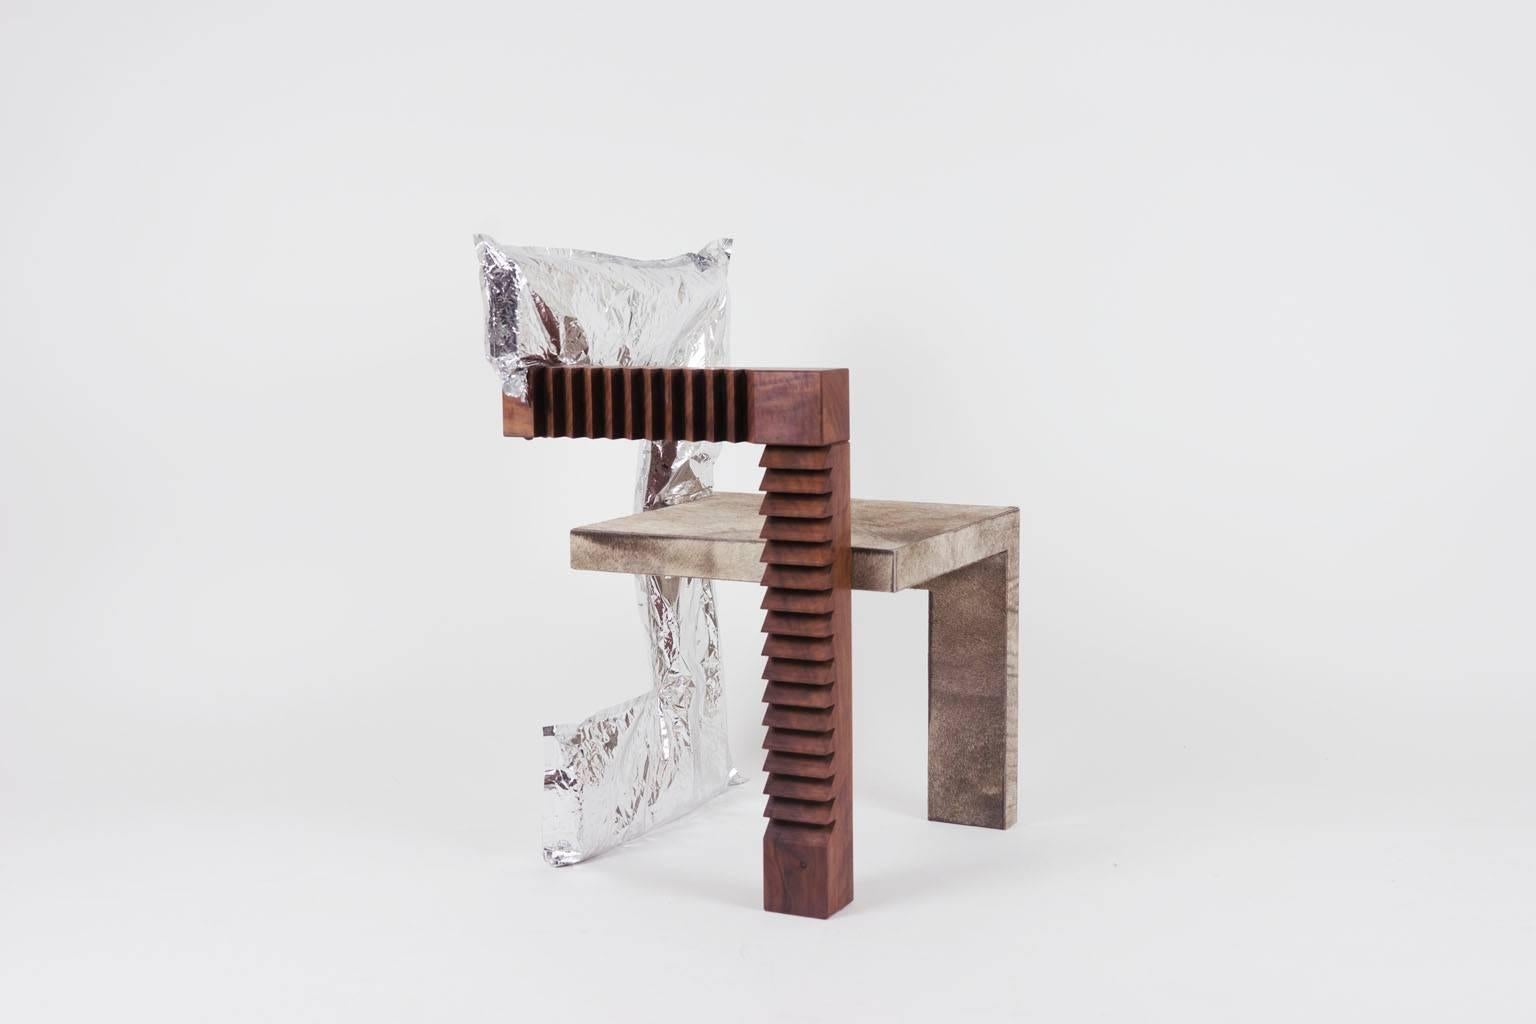 Debuting at 'The New Frontier: Young Designer-Makers in the Pacific Northwest' exhibition at the Bellevue Art Museum. 

This limited edition chair utilizes a modernist furniture icon, Rietveld's 'Steltman' chair, as a shape and remixes it with an